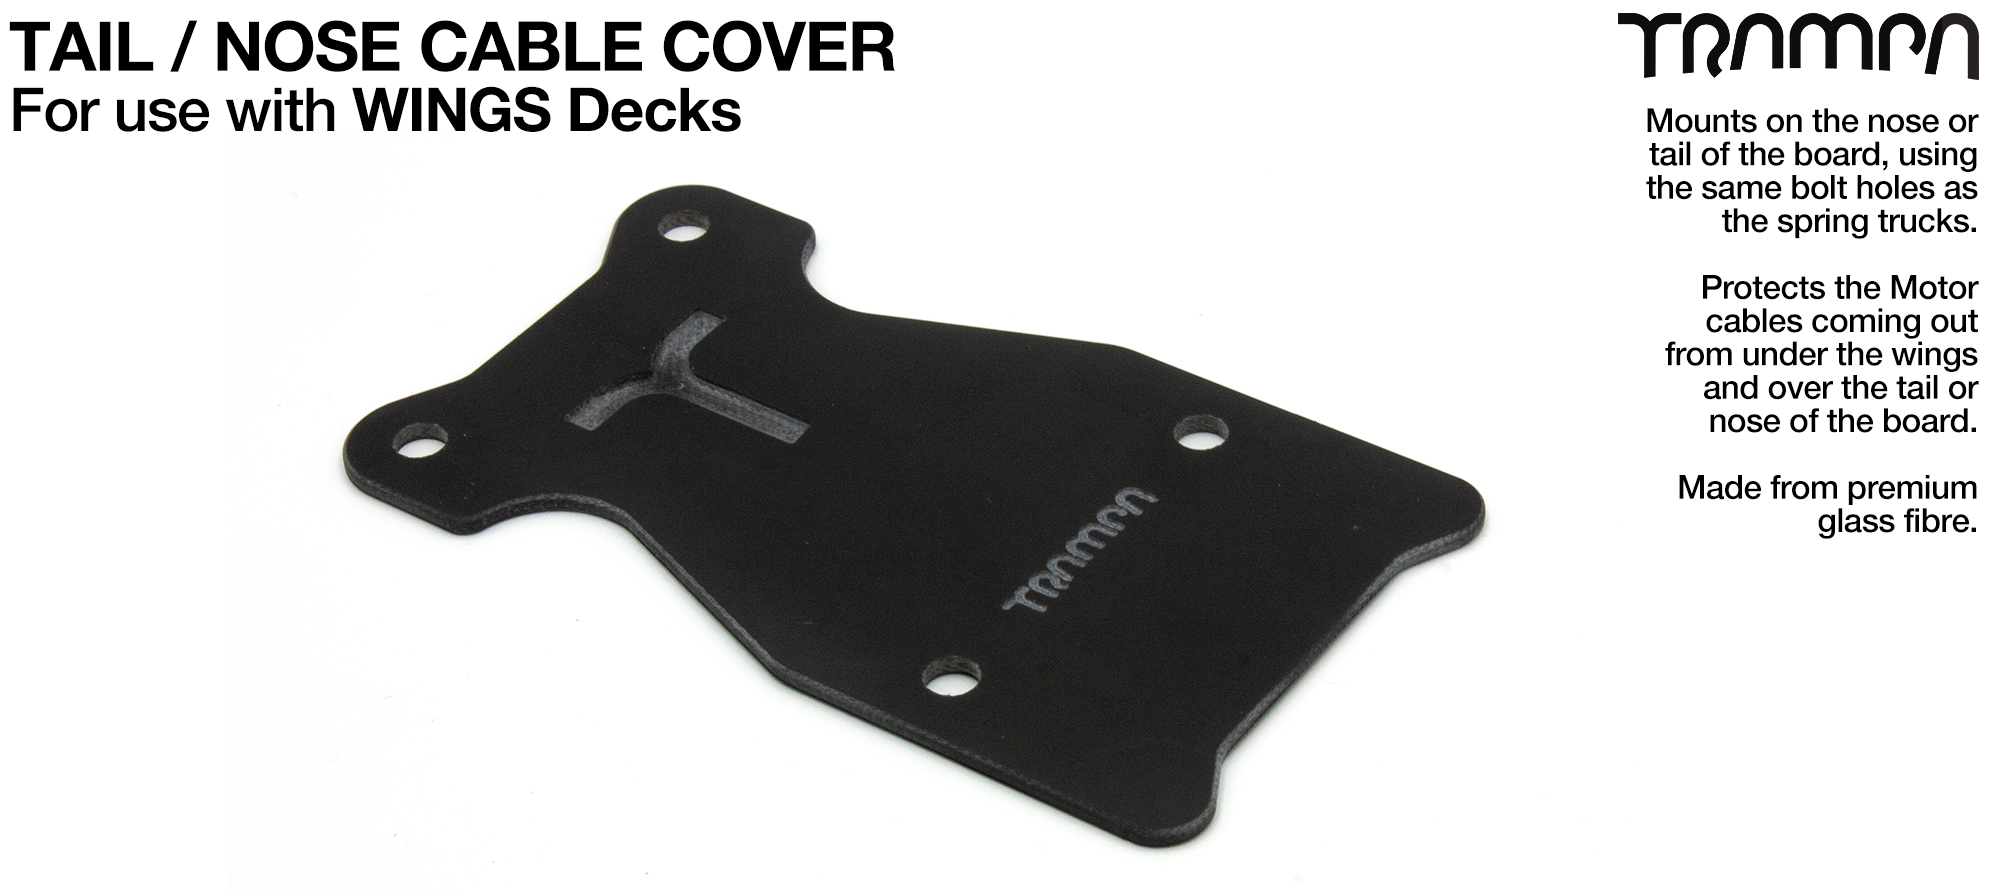 GLASS FIBRE SHOULDERED Cable Cover fits over the nose or tail truck fixings for Electric Mountainboard Decks with Wings